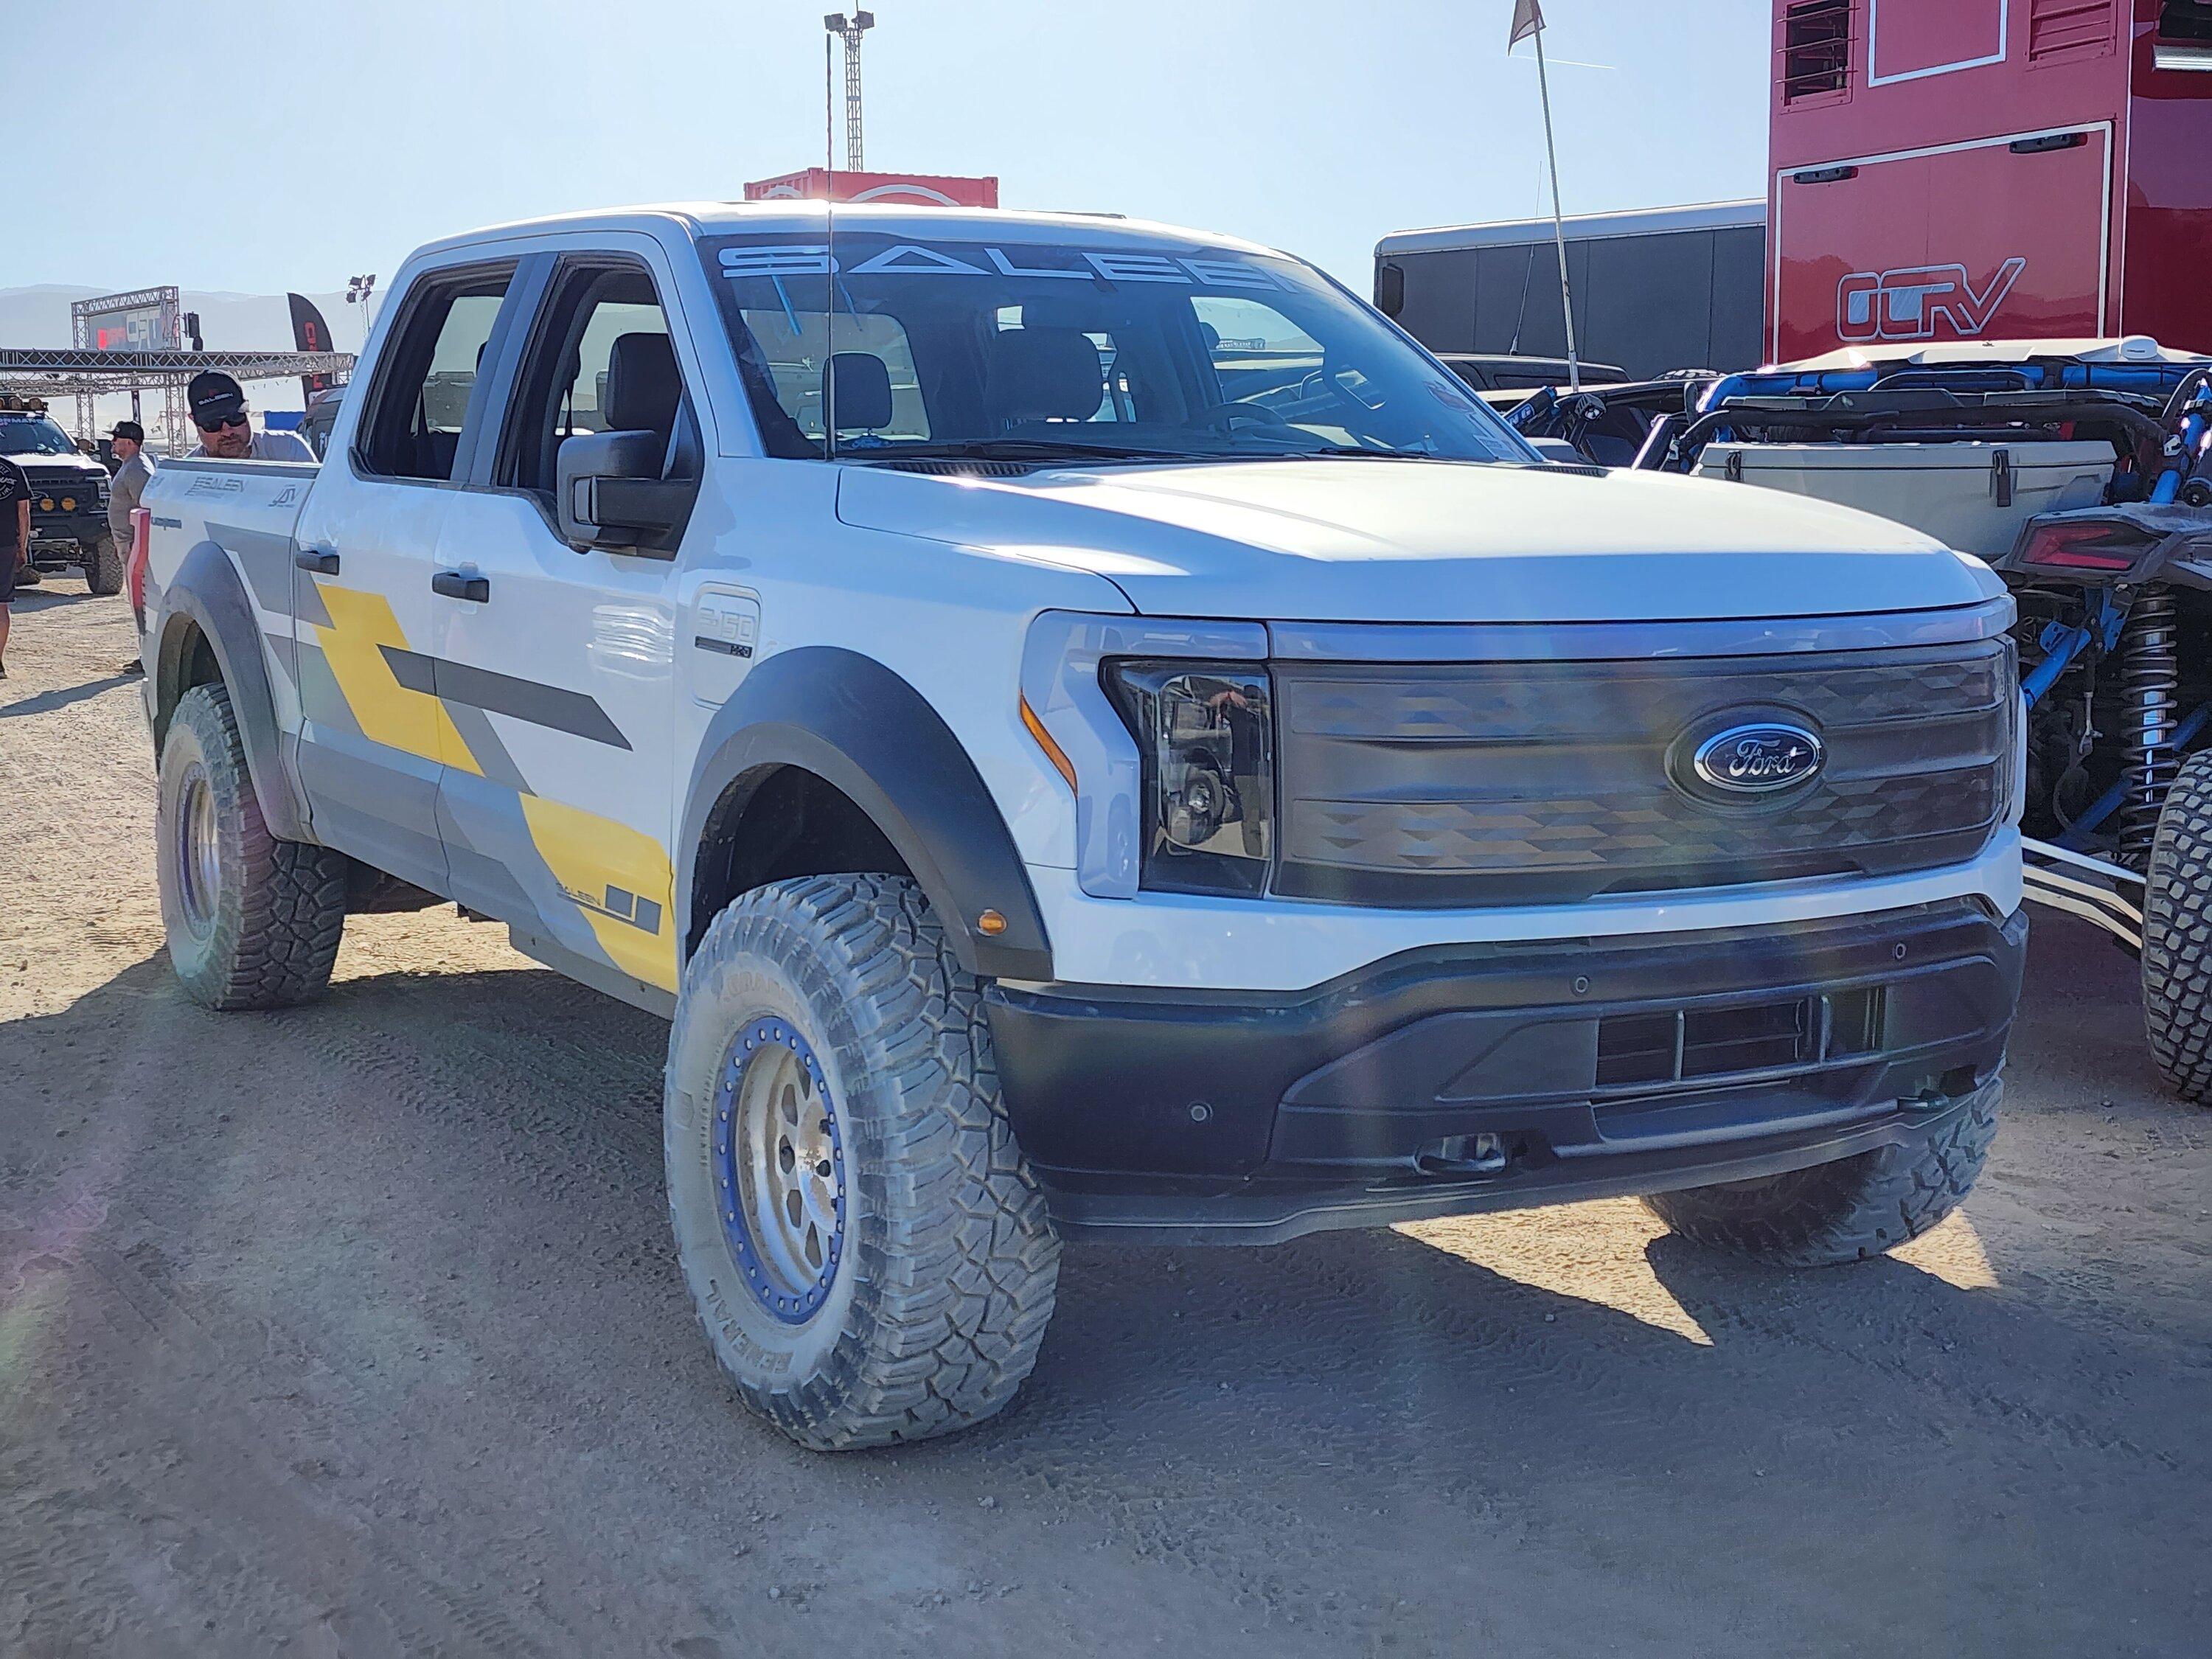 Ford F-150 Lightning Saleen F150 Lightning first look w/ Raptor front suspension & fenders + custom rear suspension and offroad tires 20230208_151018